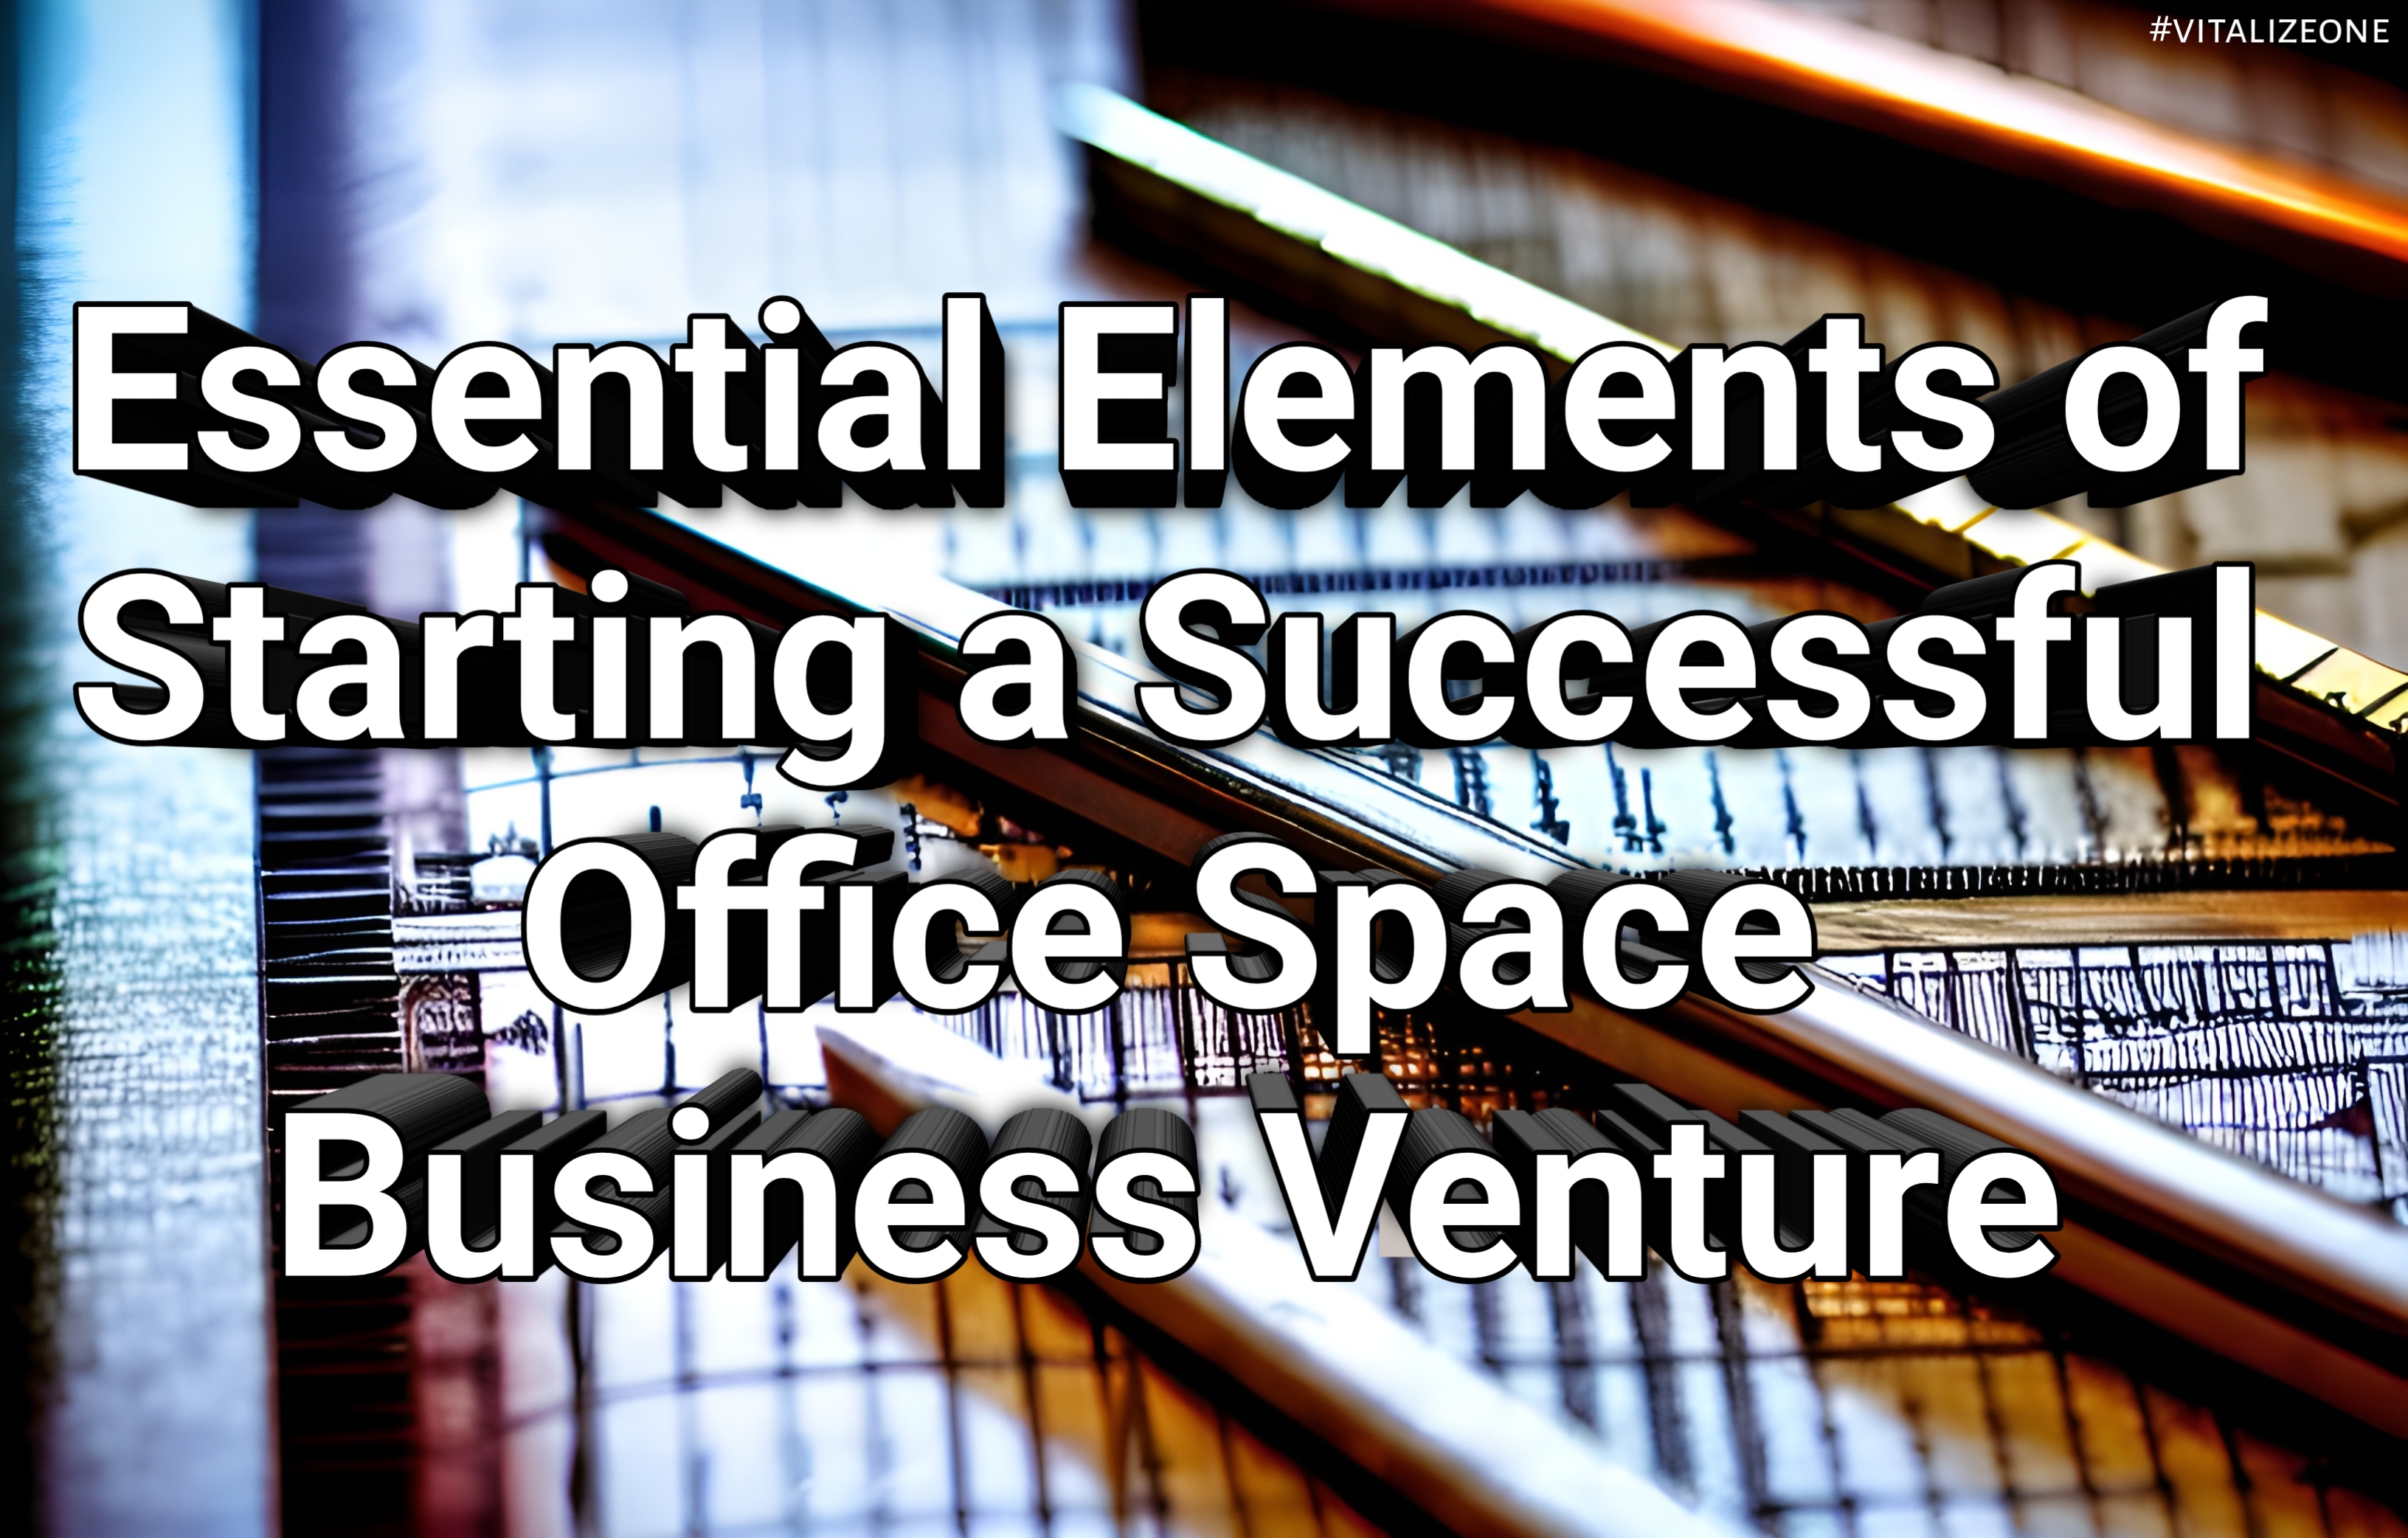 Essential Elements of Starting a Successful Office Space Business Venture